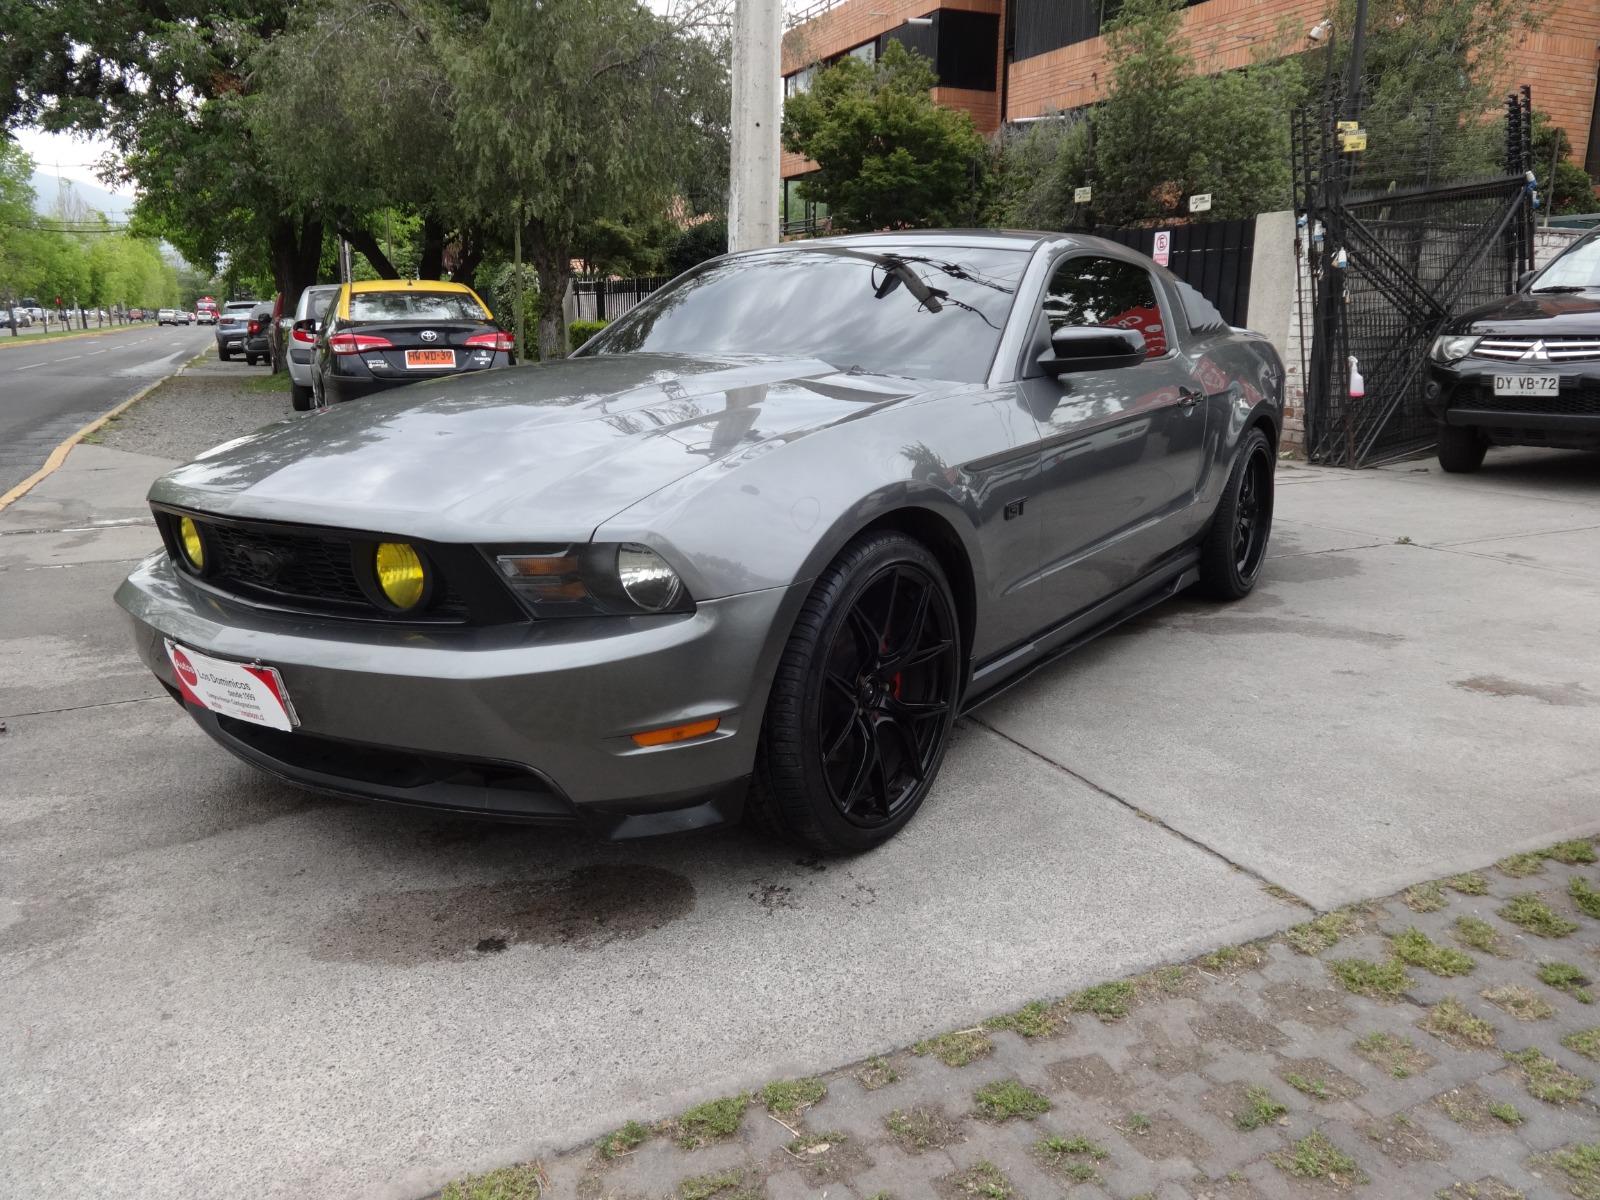 FORD MUSTANG GT 4.6 AUT COUPE 2010 V8 DELUXE  - FULL MOTOR